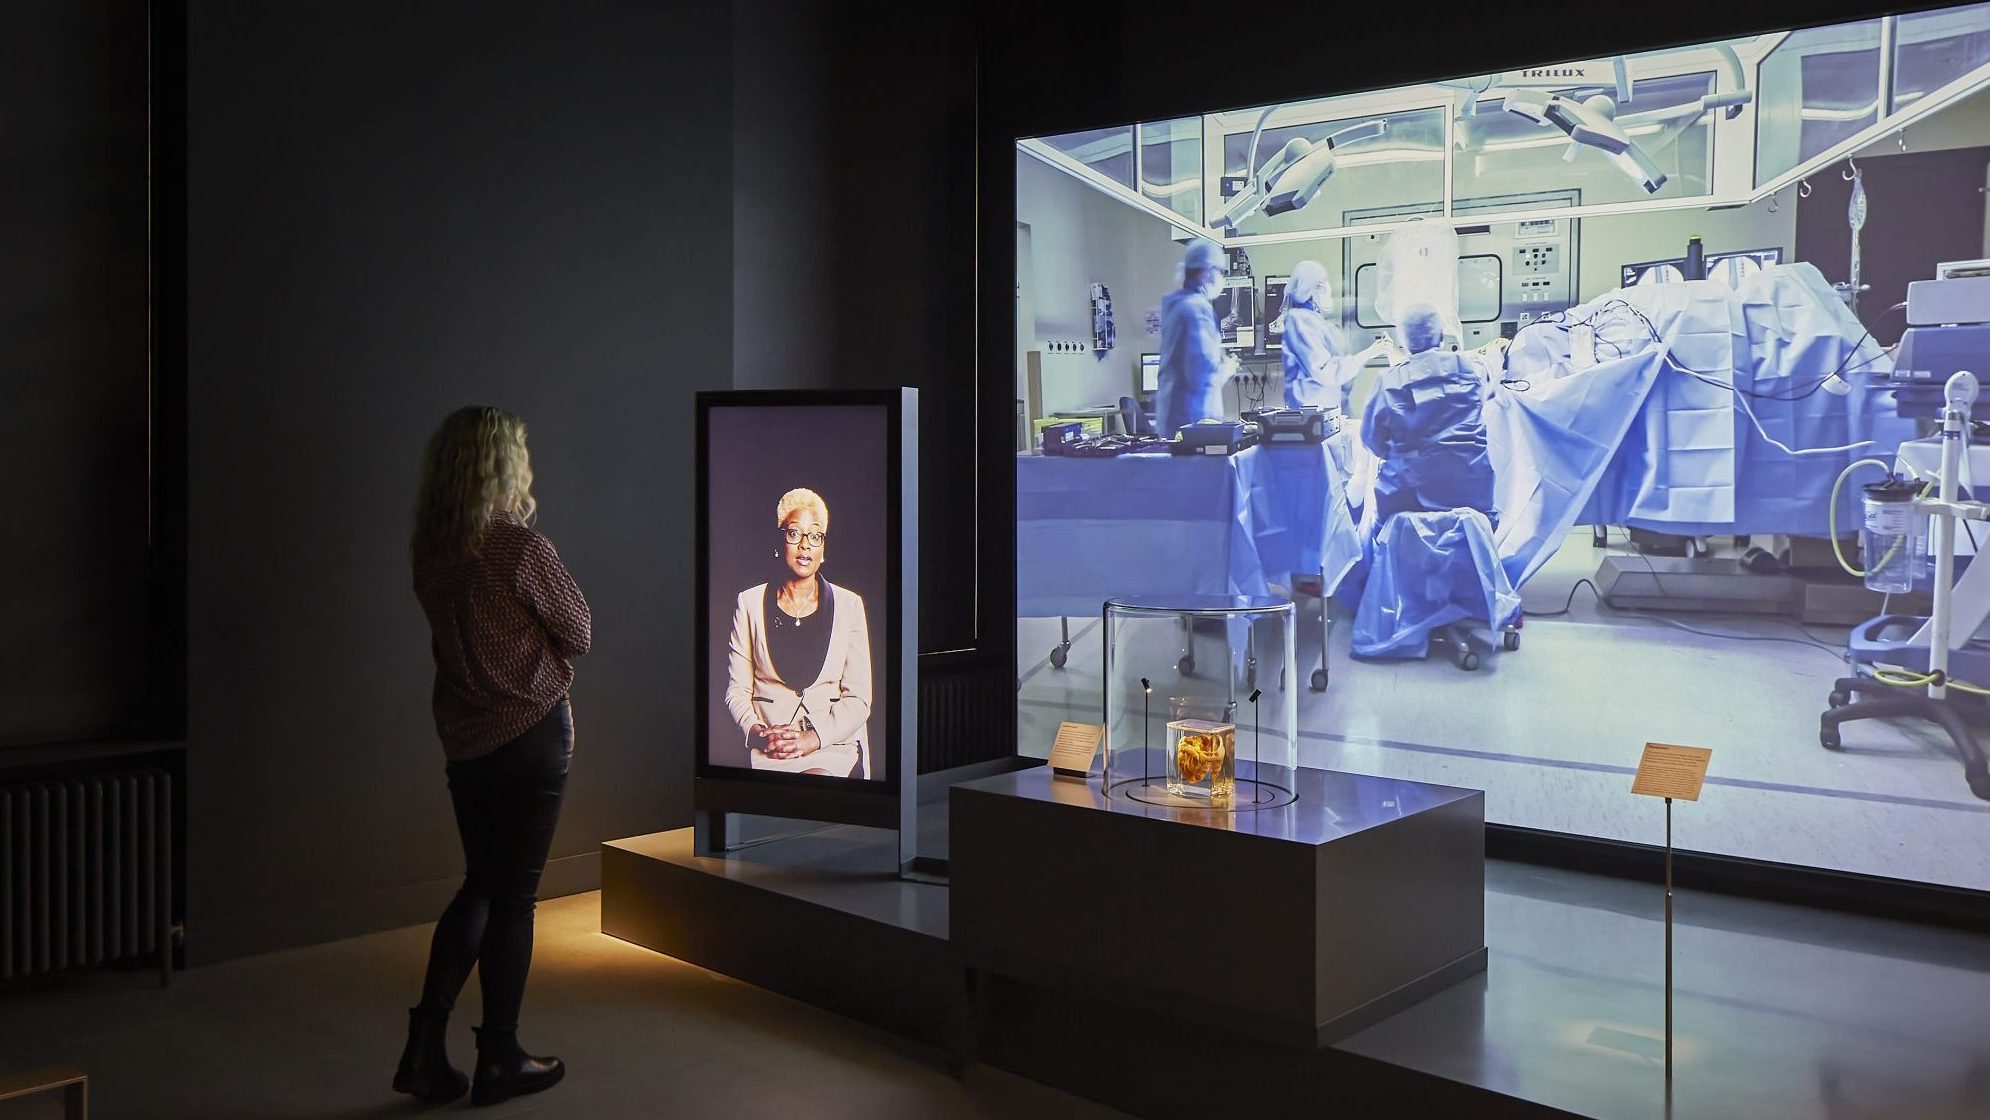 The Hunterian Museum's final gallery, Transforming Lives, shows interviews with surgeons and their patients about life-changing surgery